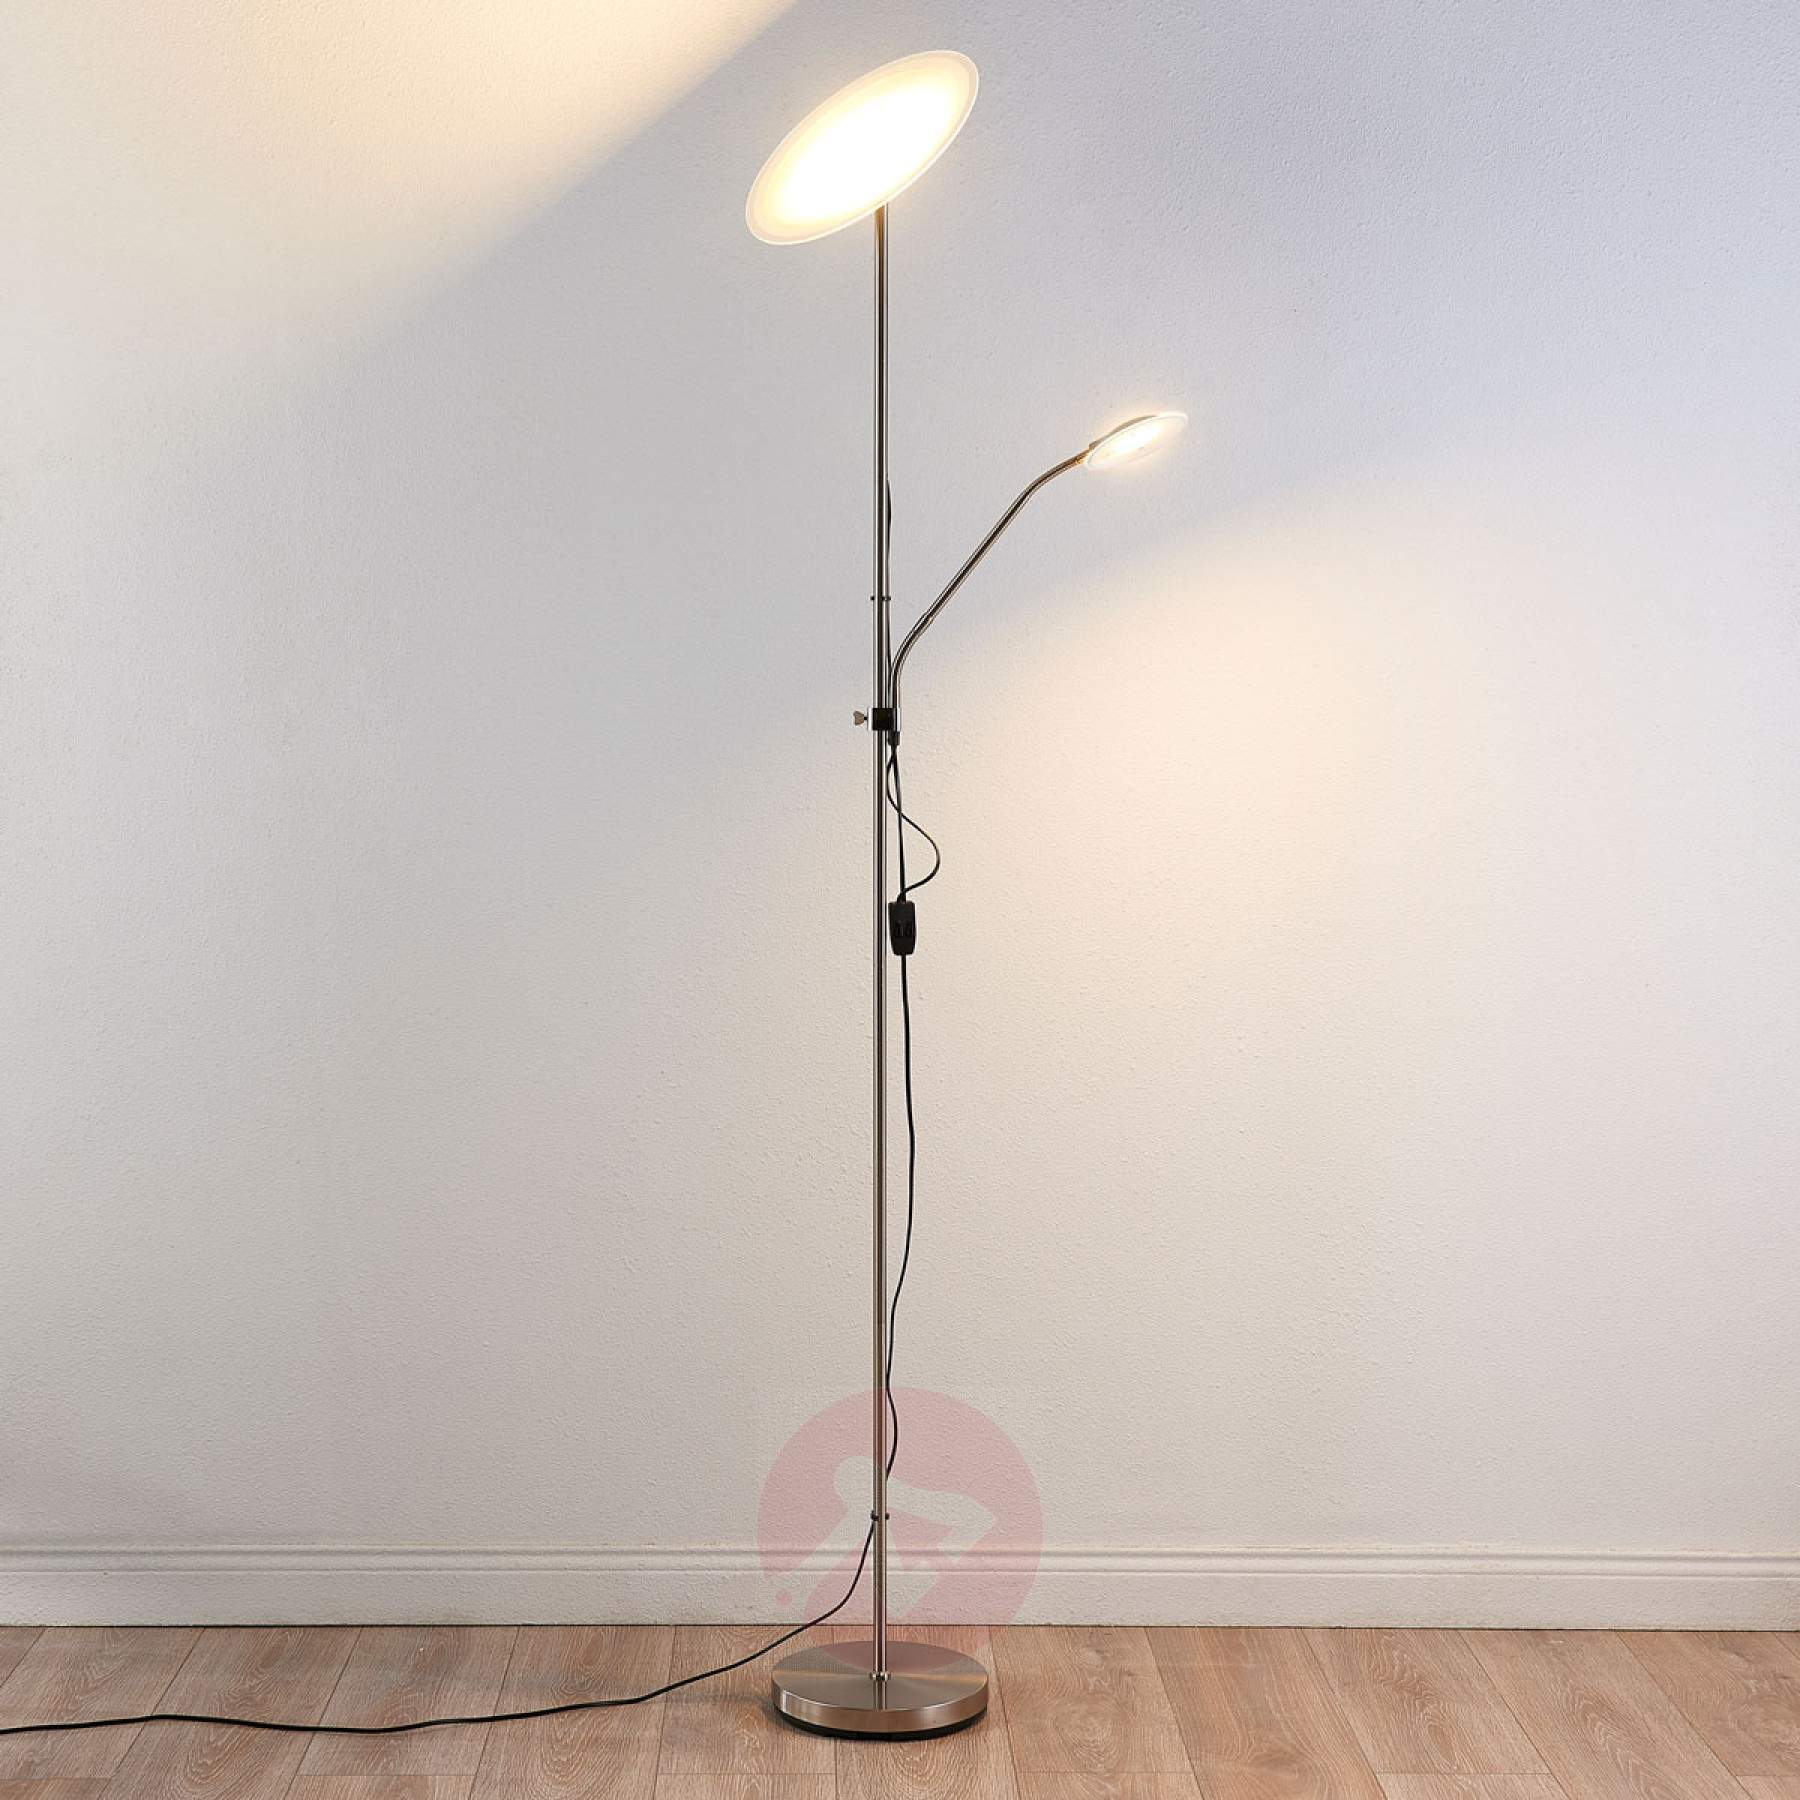 Discreet Led Floor Lamp Ela With Reading Arm within dimensions 1800 X 1800